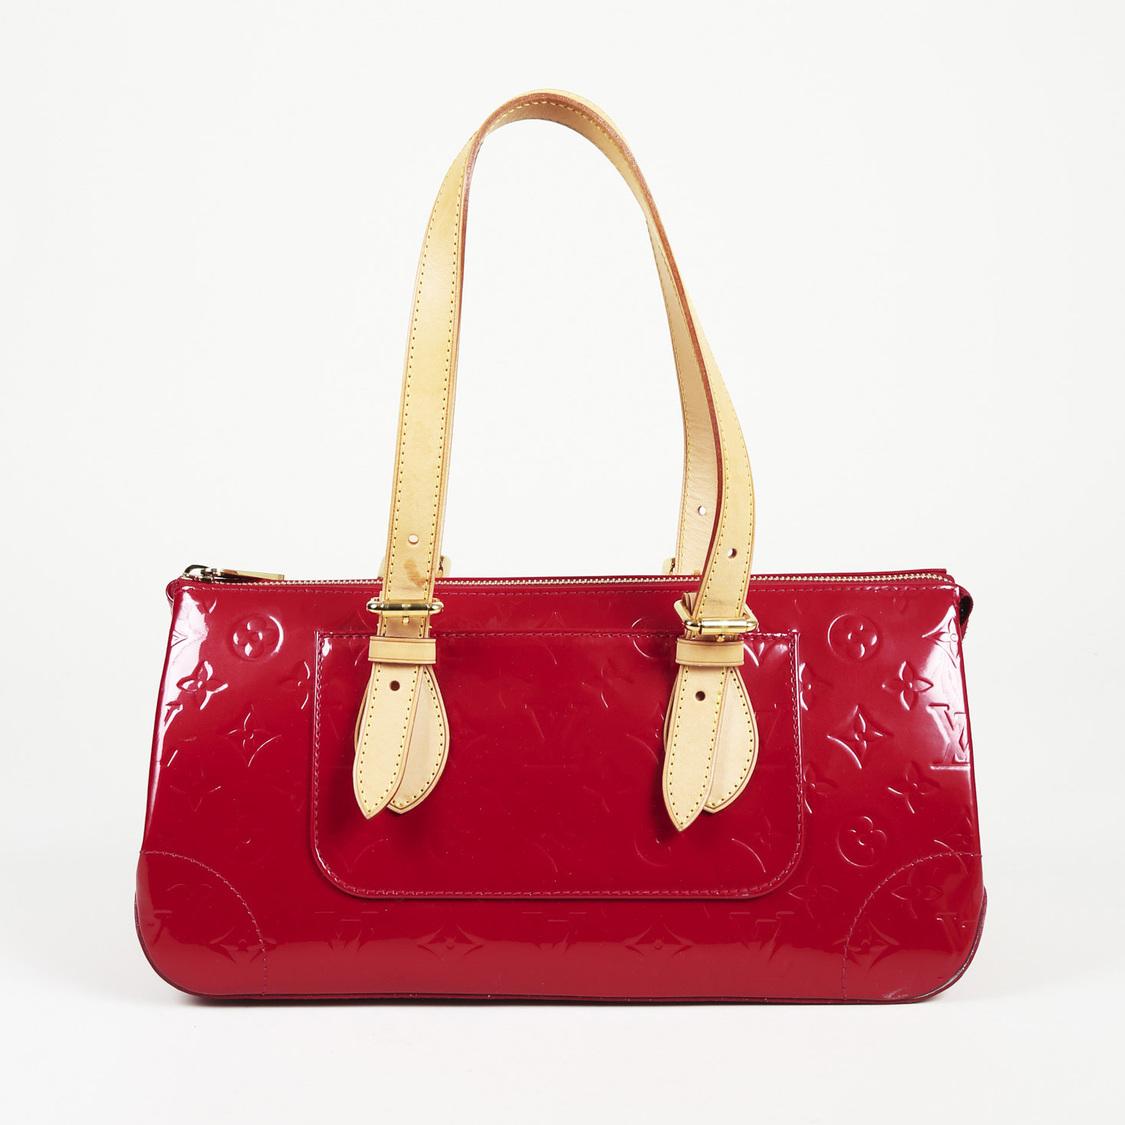 Louis Vuitton Rosewood Avenue Vernis Shoulder Bag in Red - Lyst